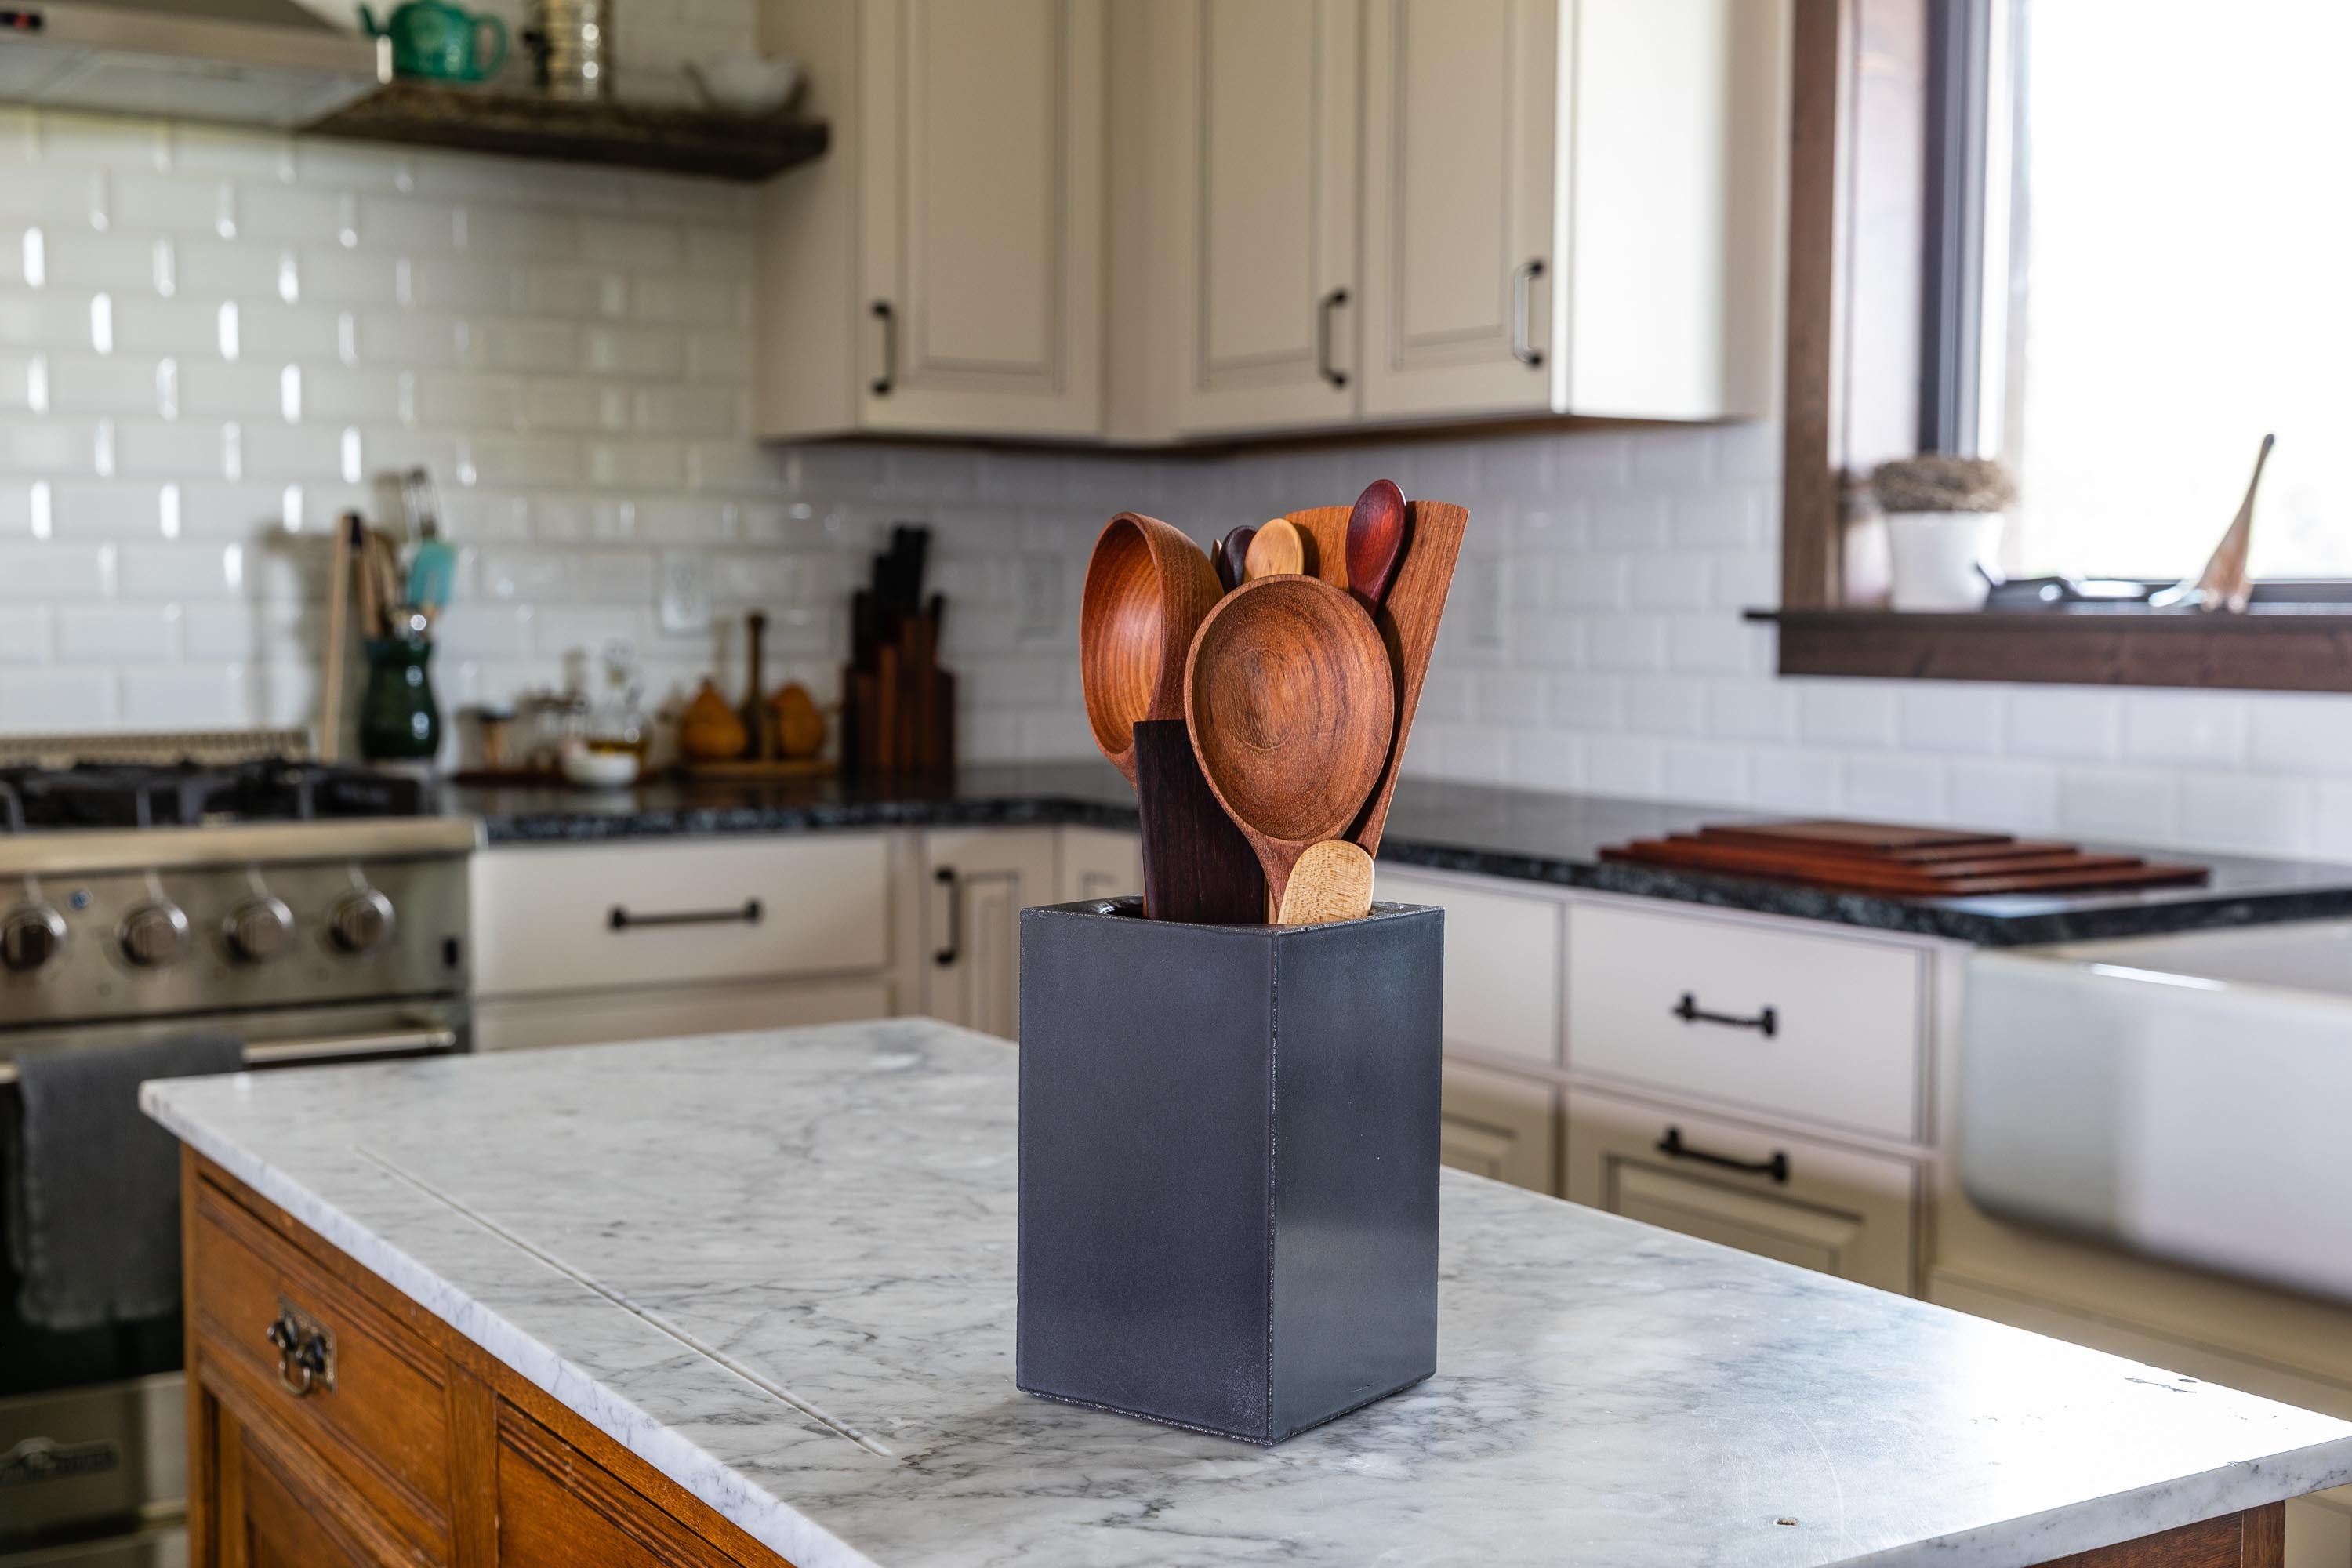 Beautiful kitchen utensils made from wood